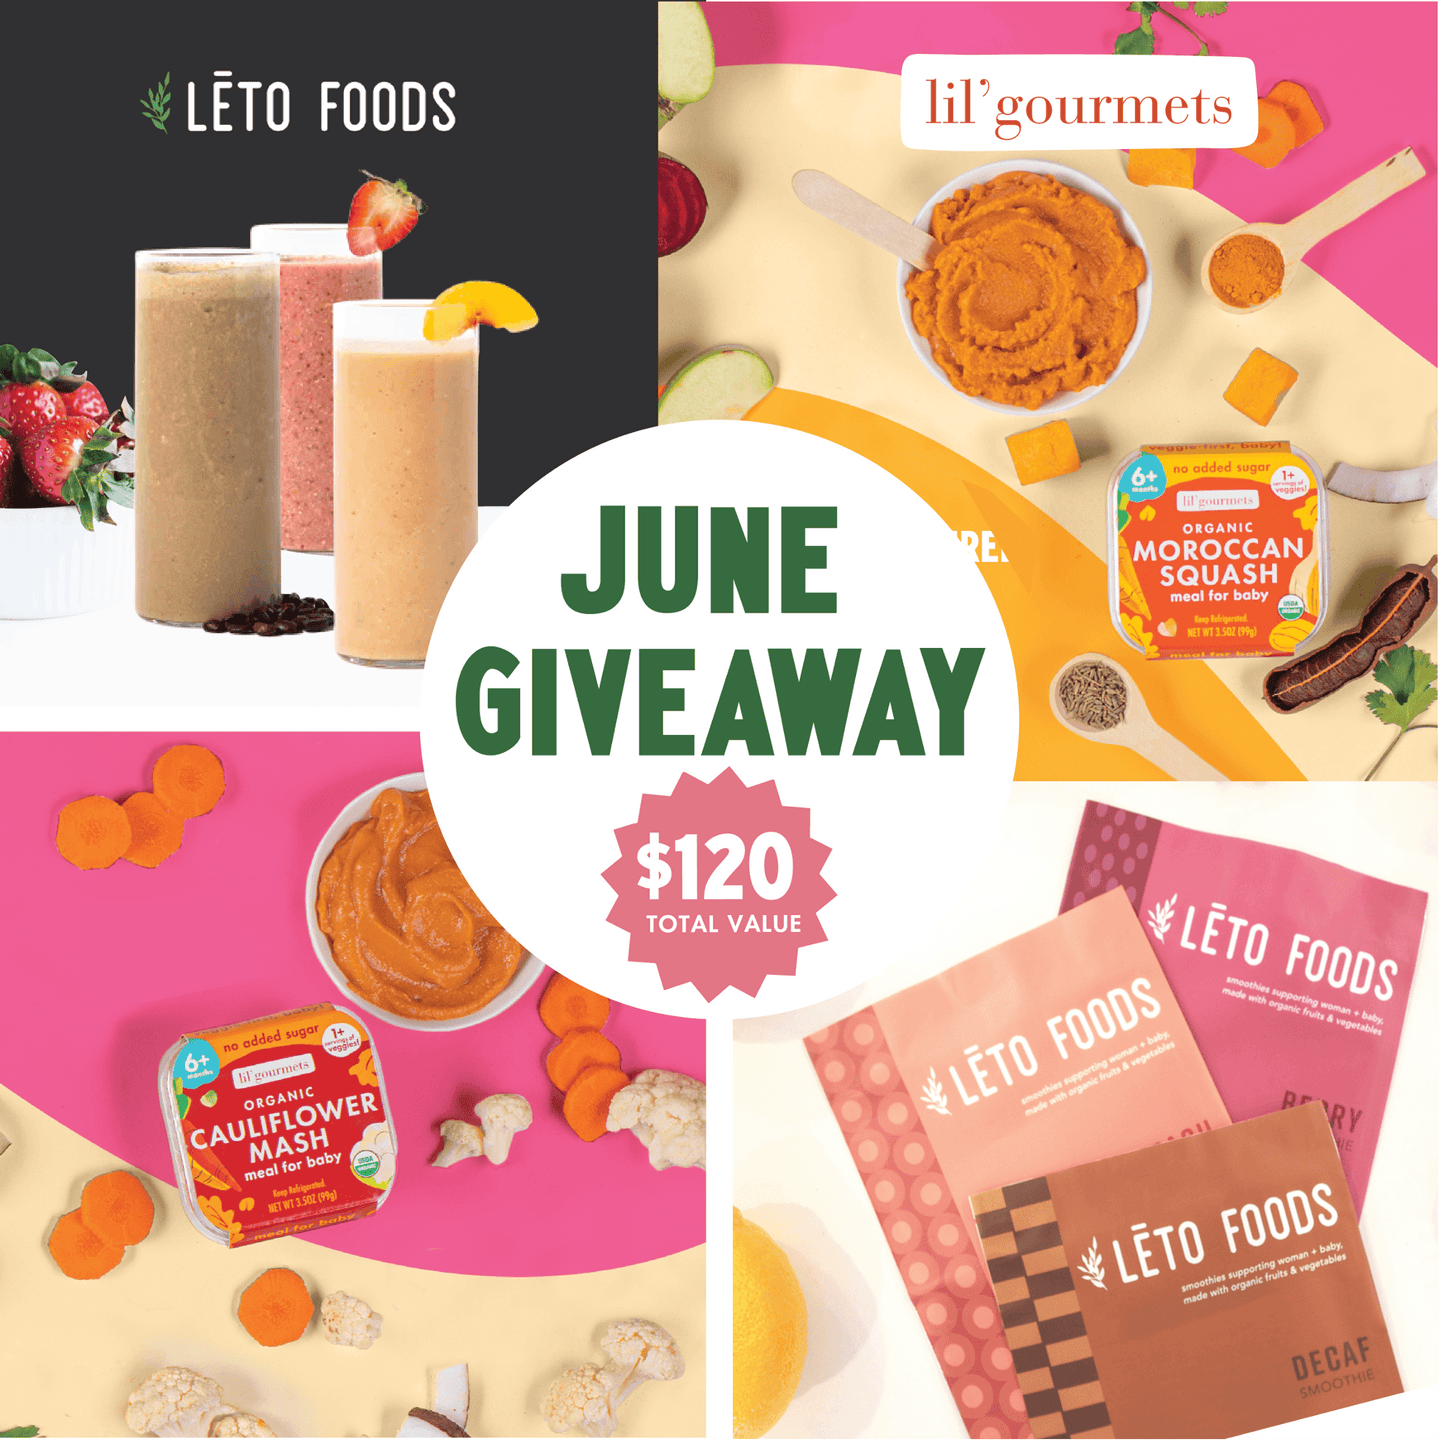 Lēto Foods Frozen Smoothies and lil’gourmets Organic Baby Meals support Babys 1,000 day critical development - lil'gourmets